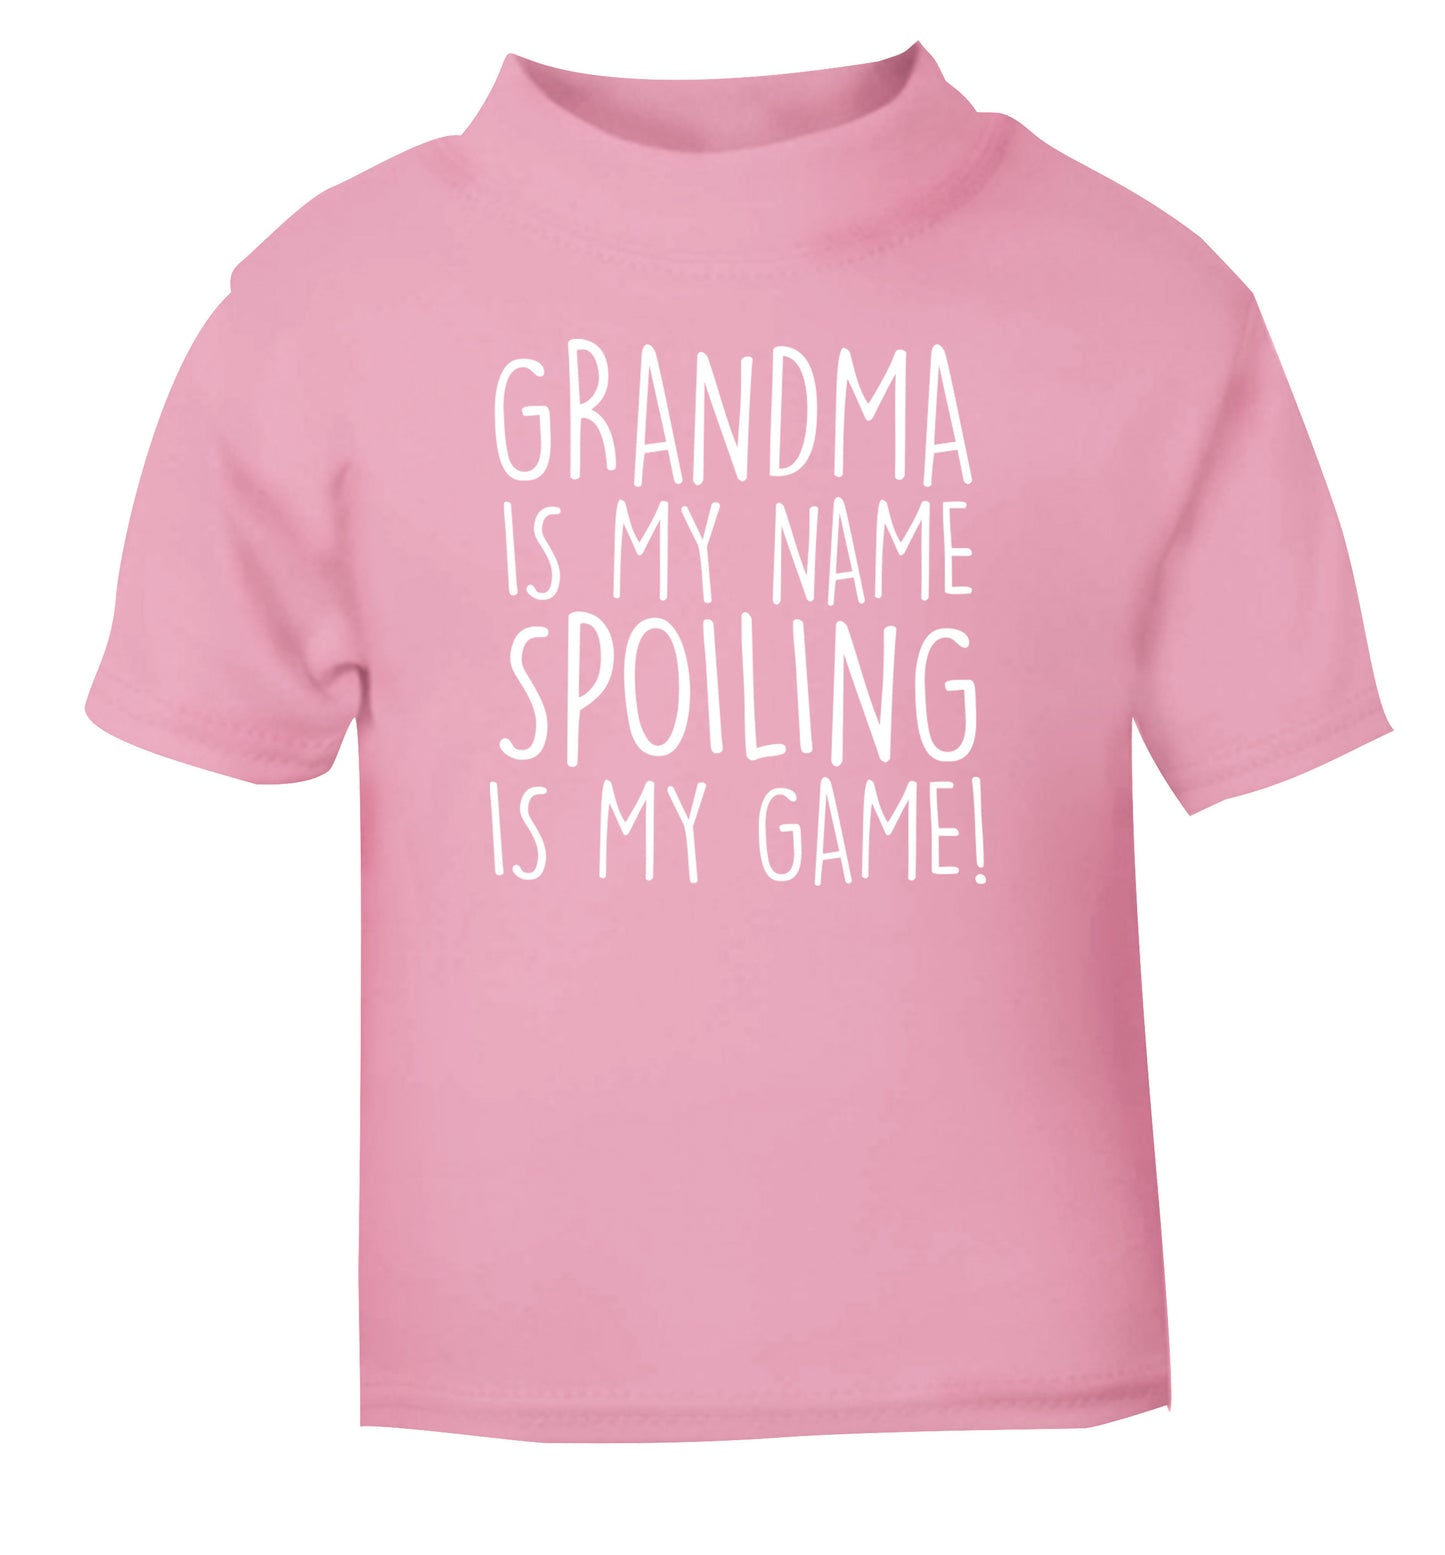 Grandma is my name, spoiling is my game light pink Baby Toddler Tshirt 2 Years